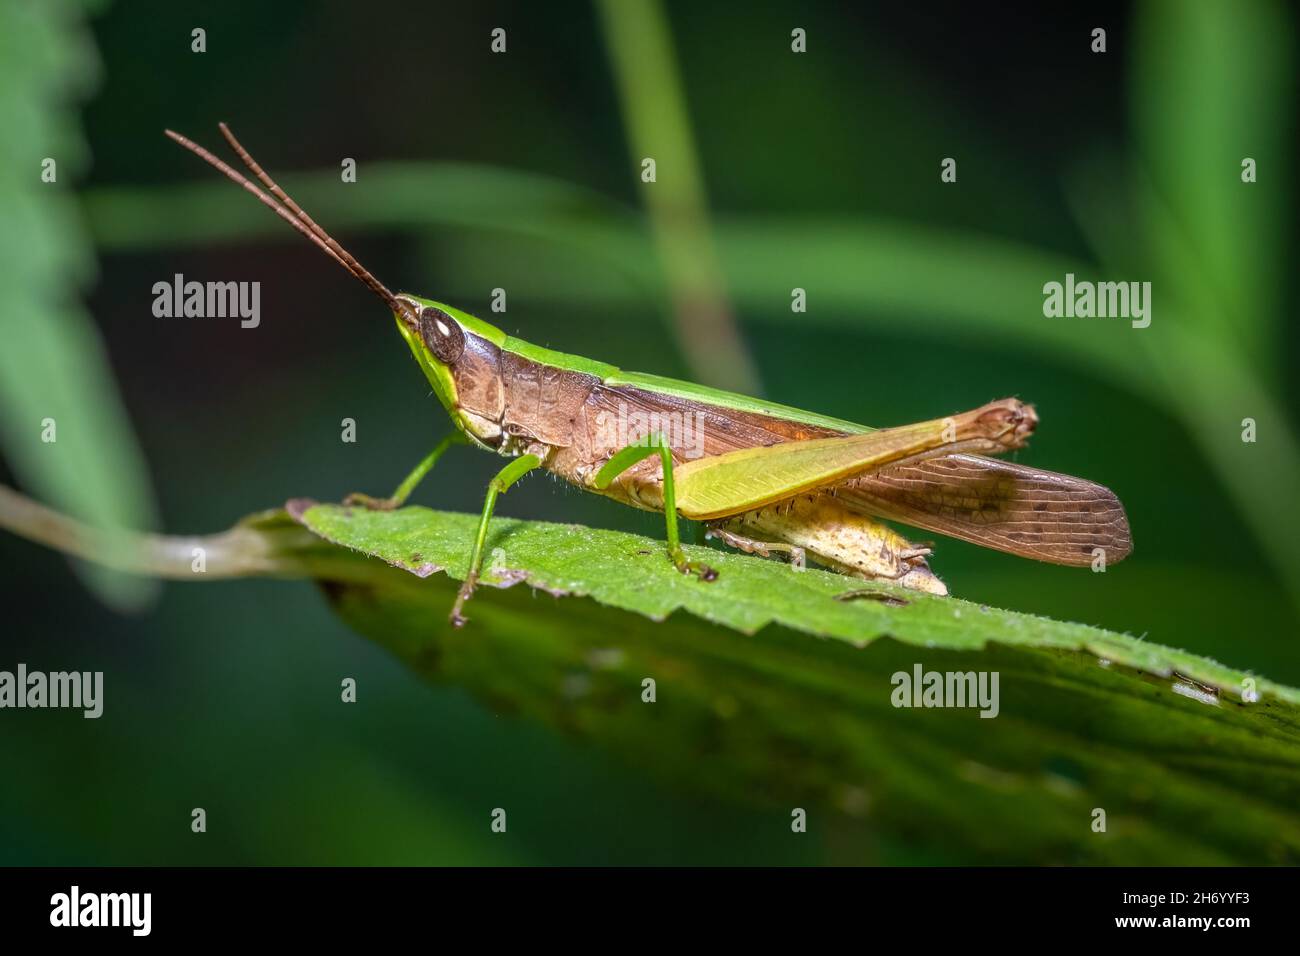 Provile view of a Clipped-winged Grasshopper (Metaleptea brevicornis). Raleigh, North Carolina. Stock Photo